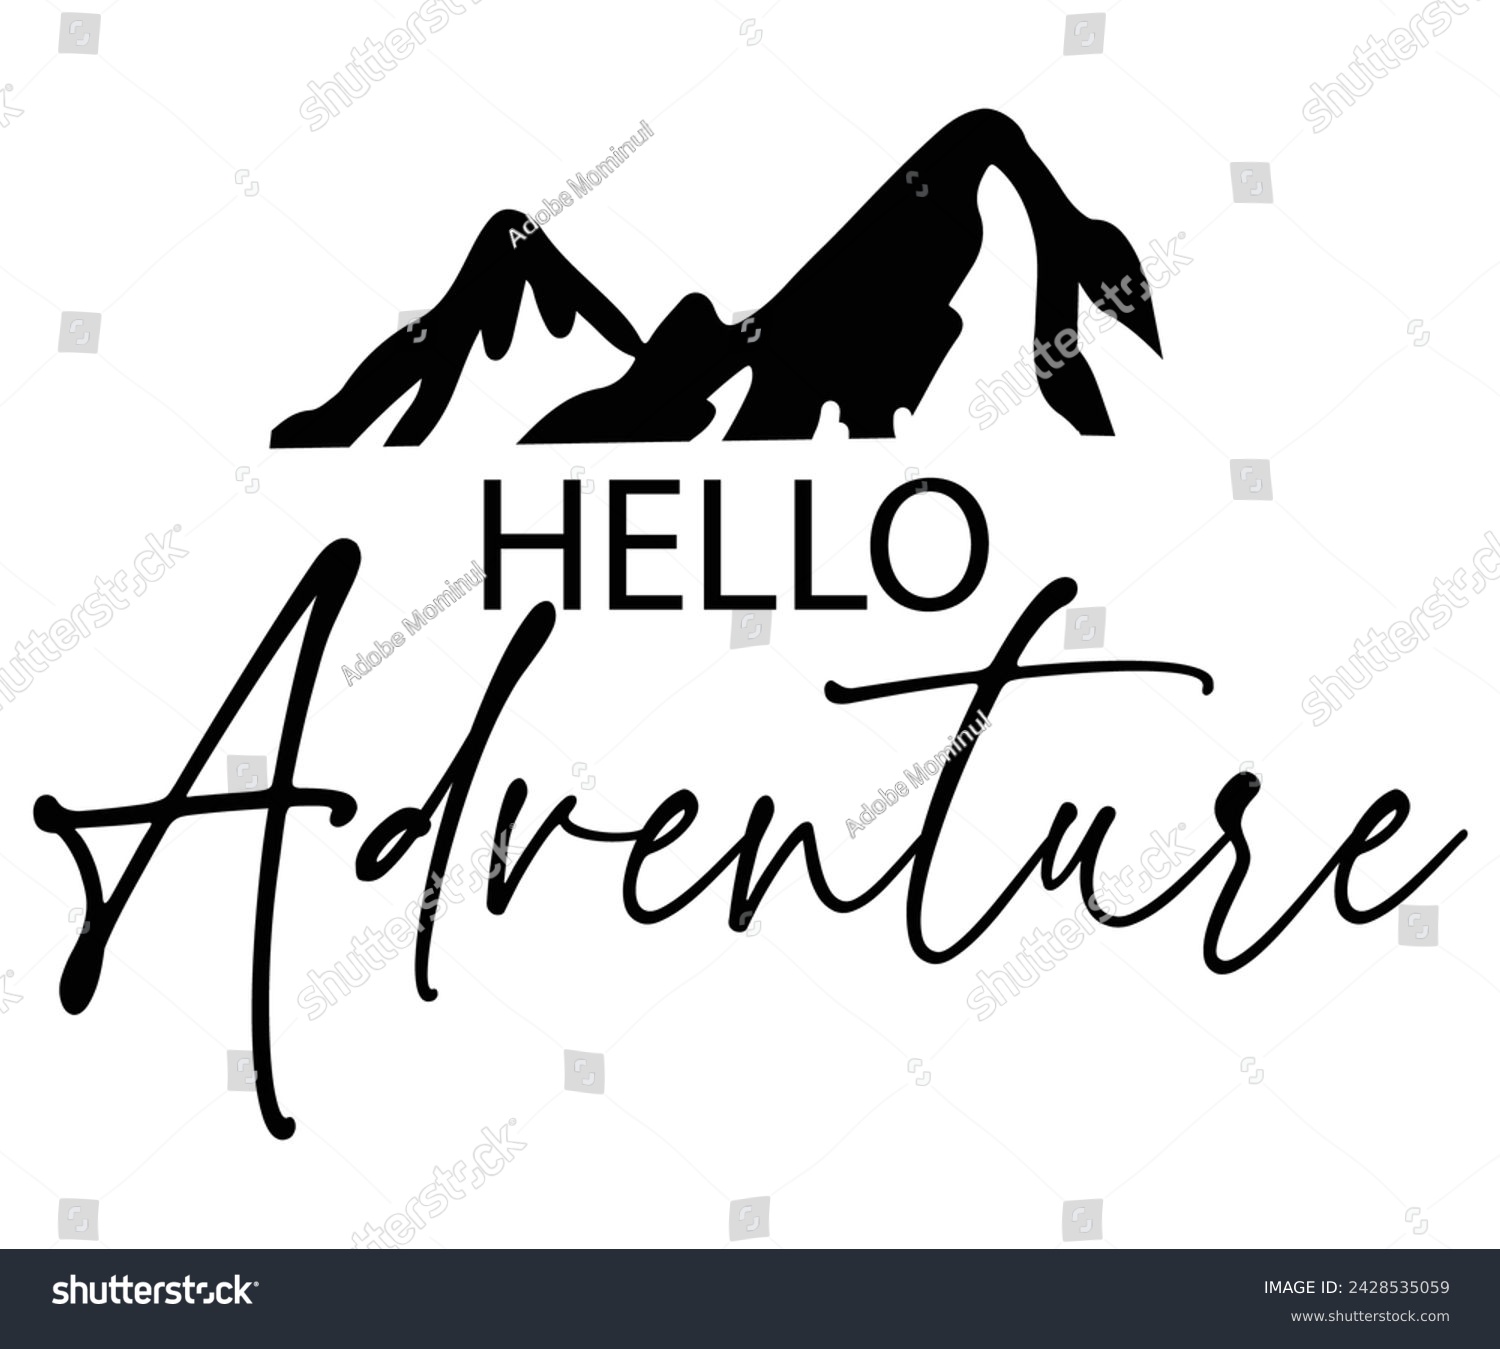 SVG of Hello Adventure Svg,Retro,Happy Camper Svg,Camping Svg,Adventure Svg,Hiking Svg,Camp Saying,Camp Life Svg,Svg Cut Files, Png,Mountain T-shirt,Instant Download svg